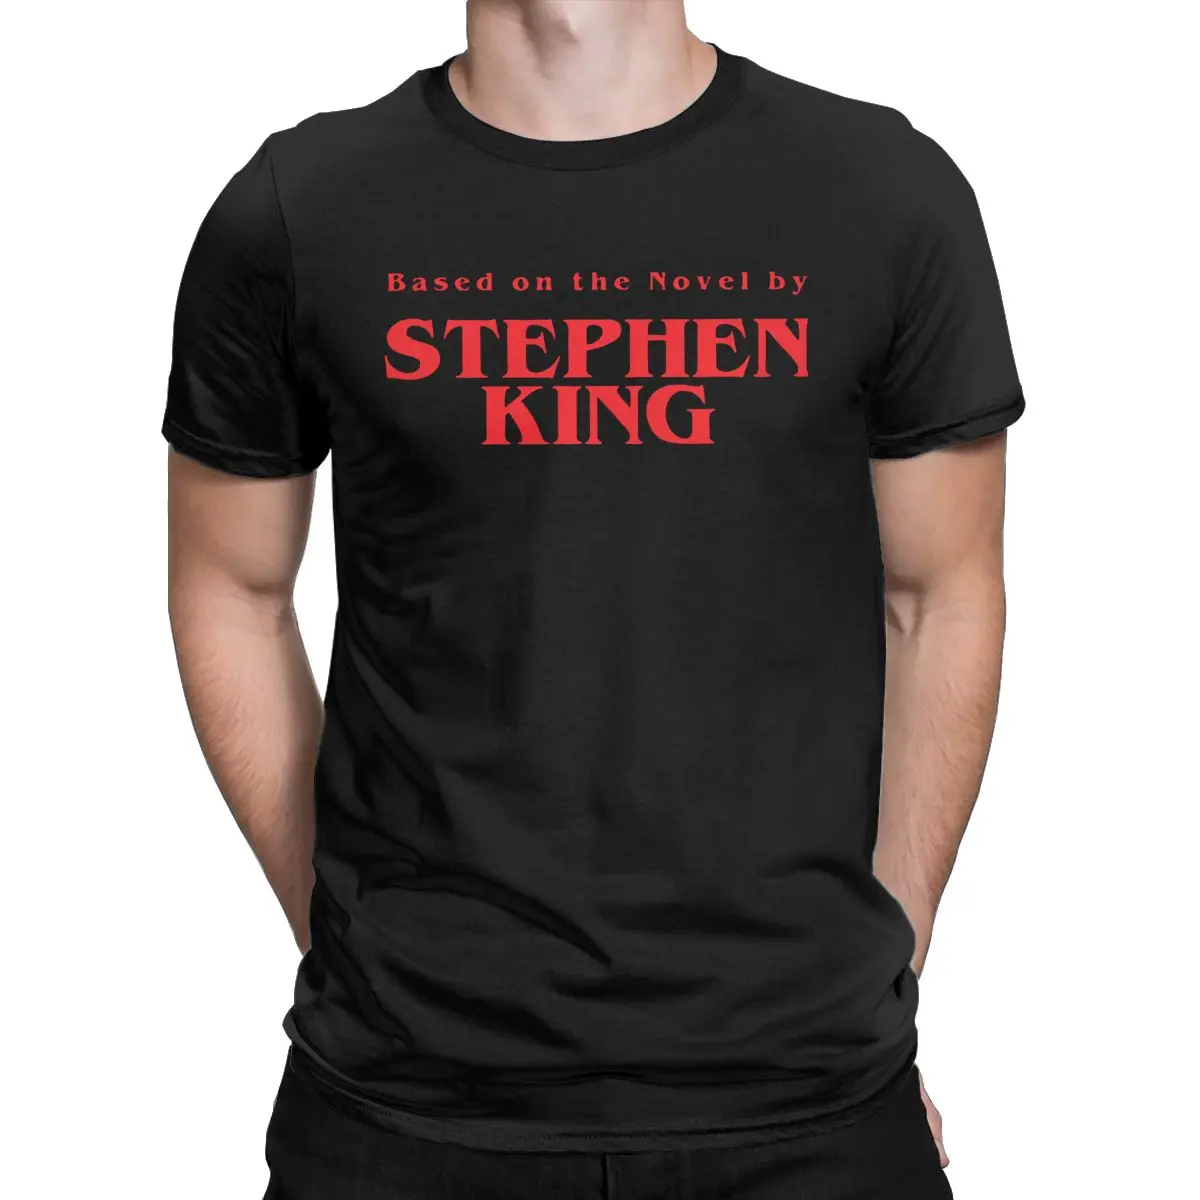 

Based On The Novel By STEPHEN KING t shirt for men Stranger Things Vintage Tees Short Sleeve Pure Cotton Printed Clothing